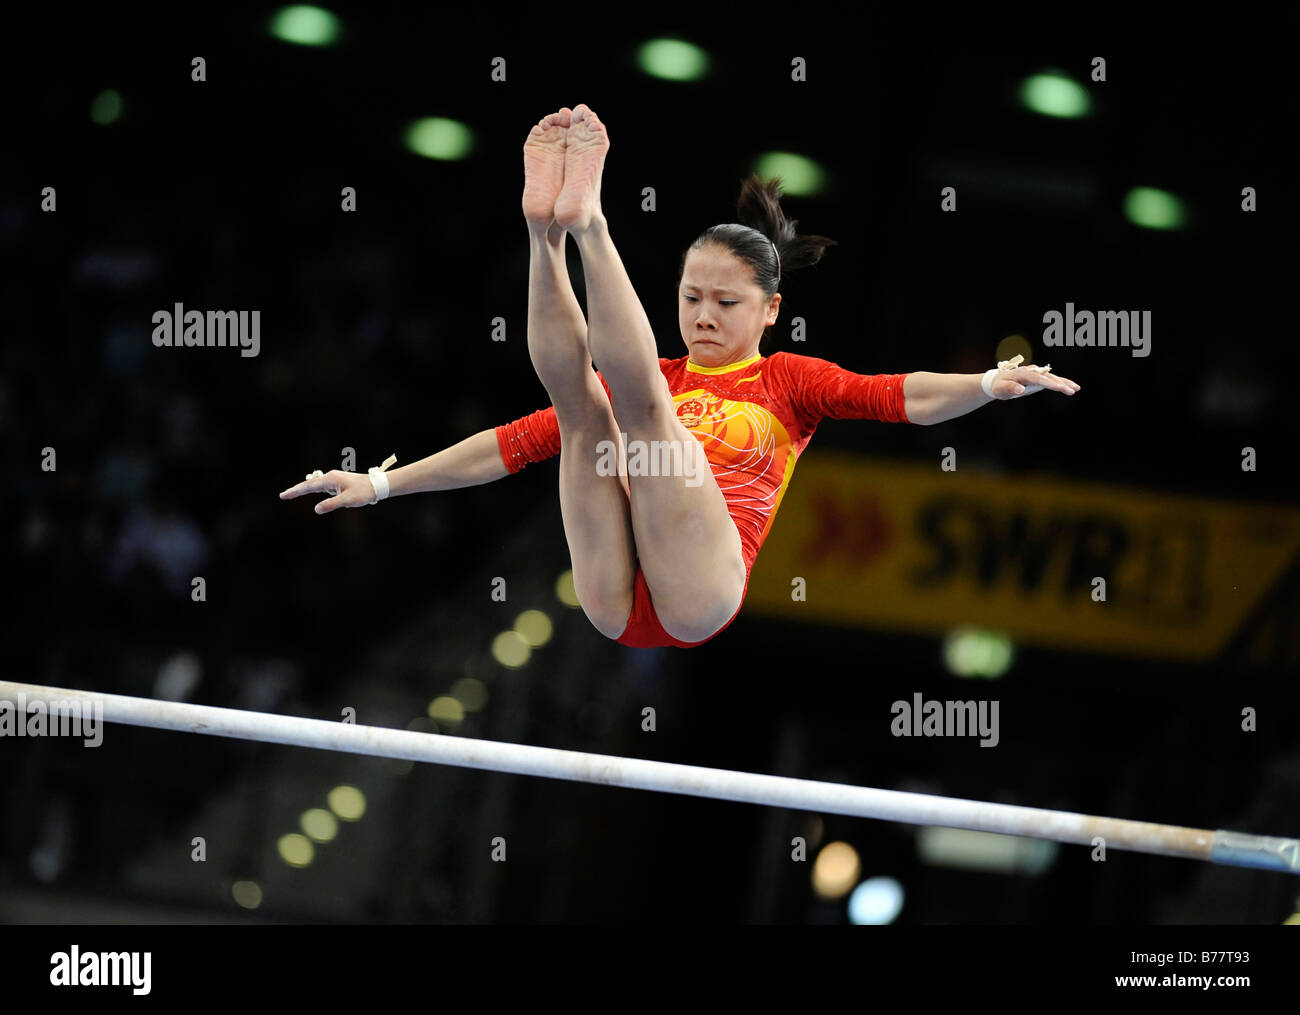 Fei Cheng, China, performing on the asymmetric bars, Gymnastics World Cup Stuttgart 2008, Baden-Wuerttemberg, Germany, Europe Stock Photo